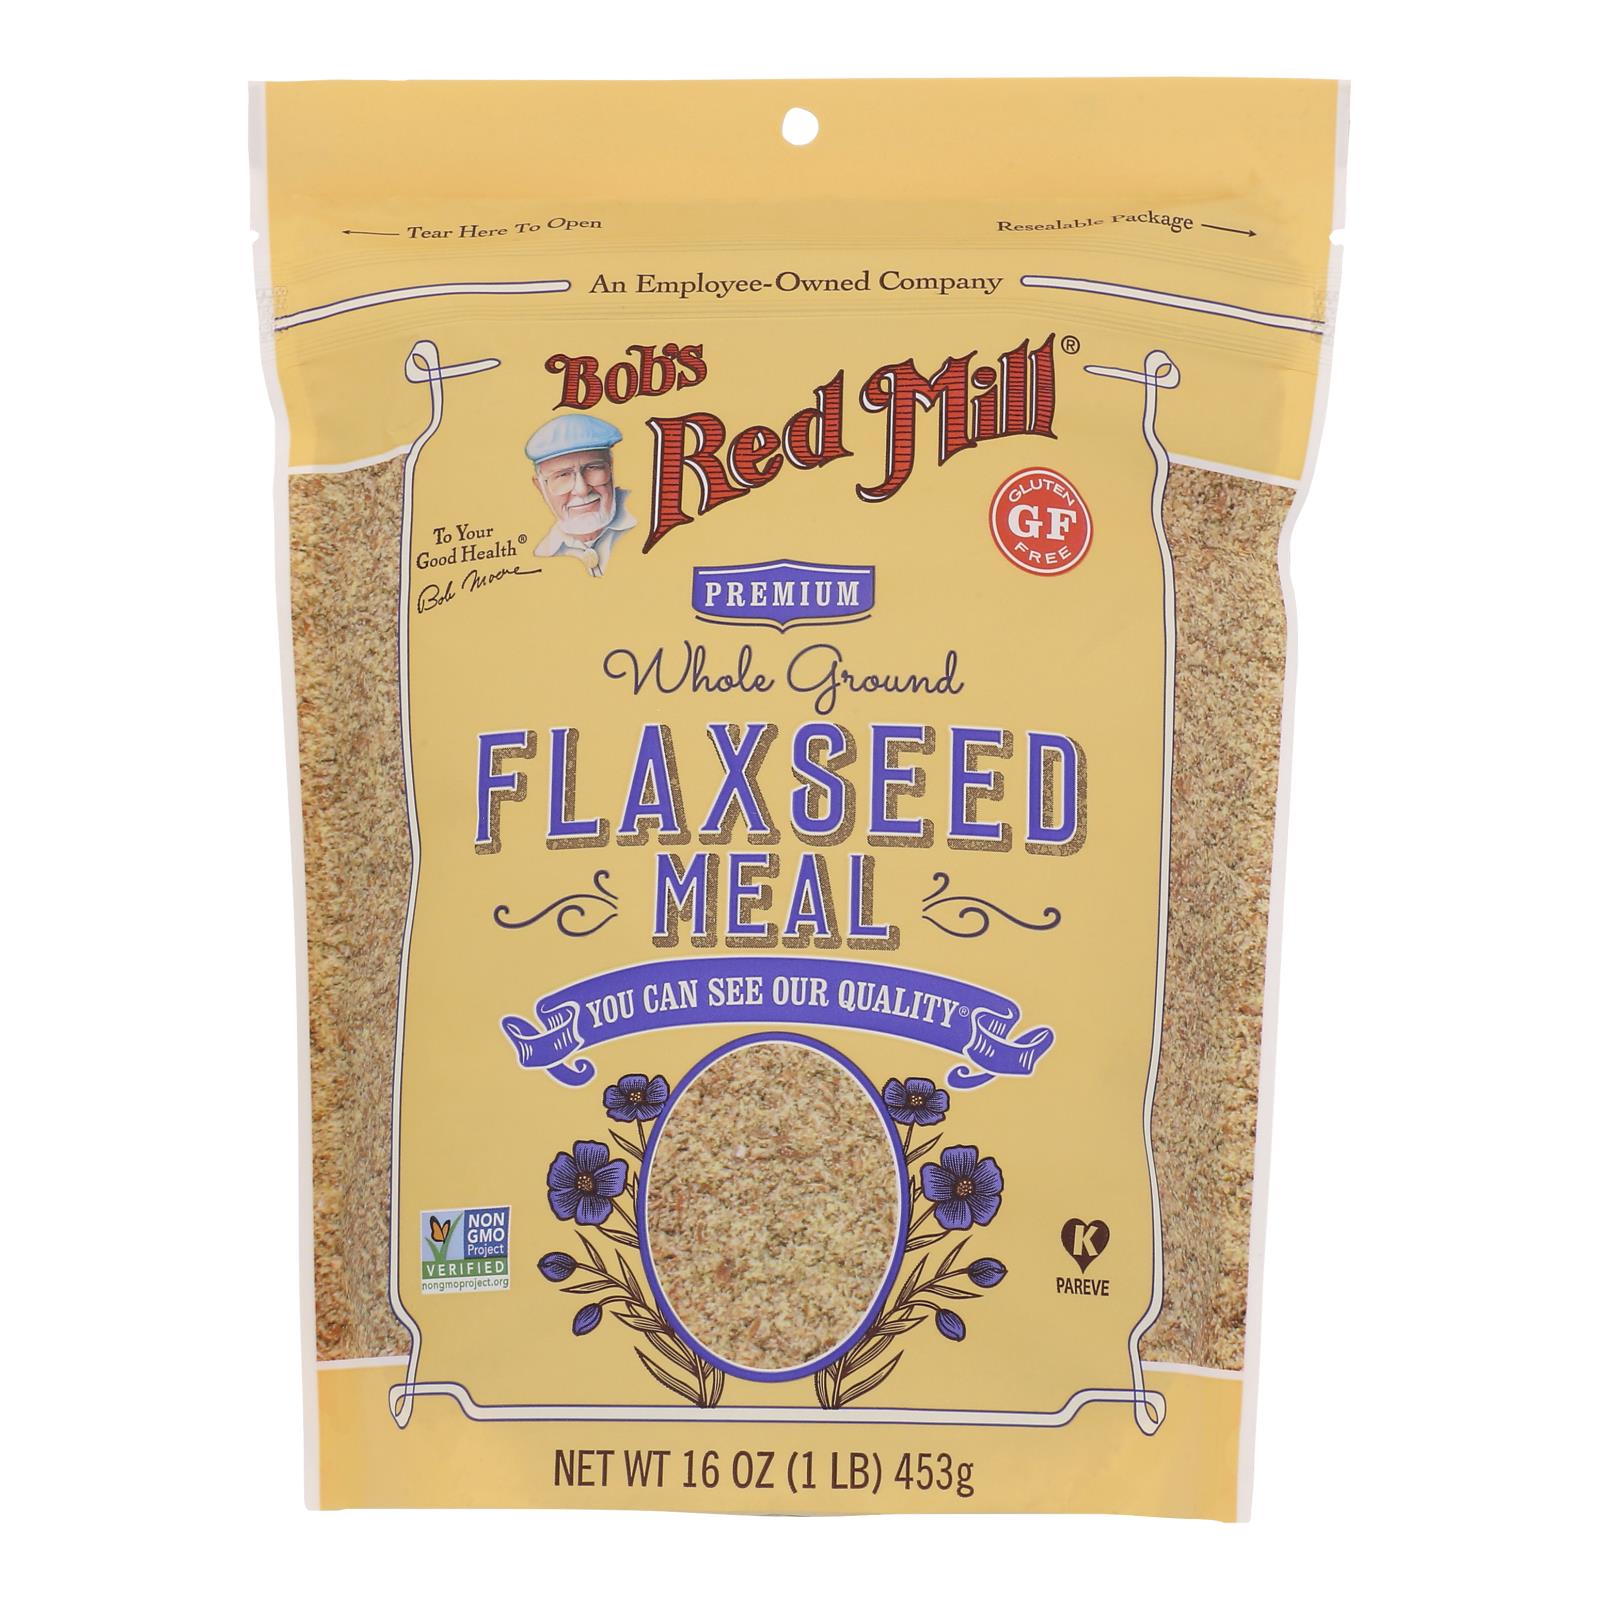 Bob's Red Mill - Flaxseed Meal - Gluten Free - Case Of 4 - 16 Oz